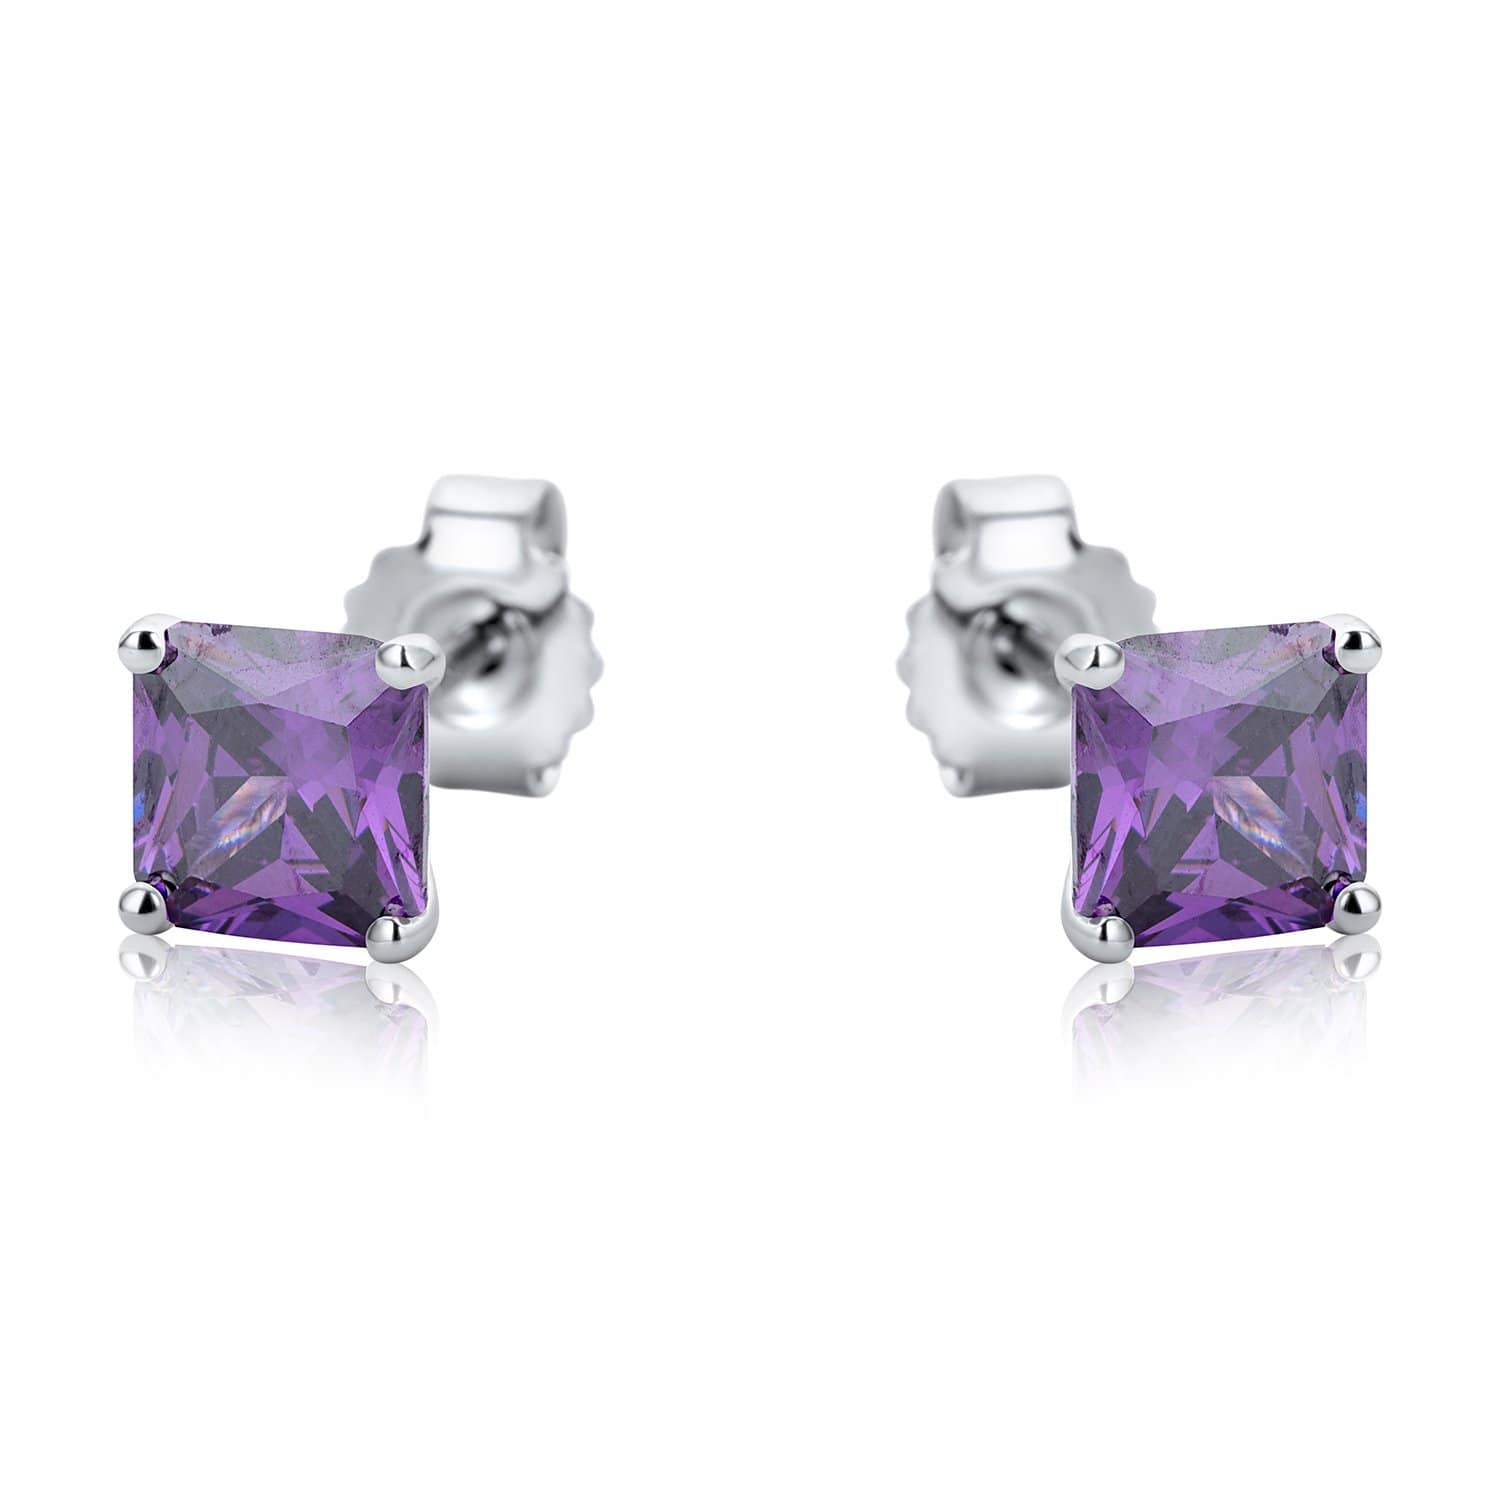 Lynora Jewellery Earring Sterling Silver Square Multicolour Stud Set Sterling Silver